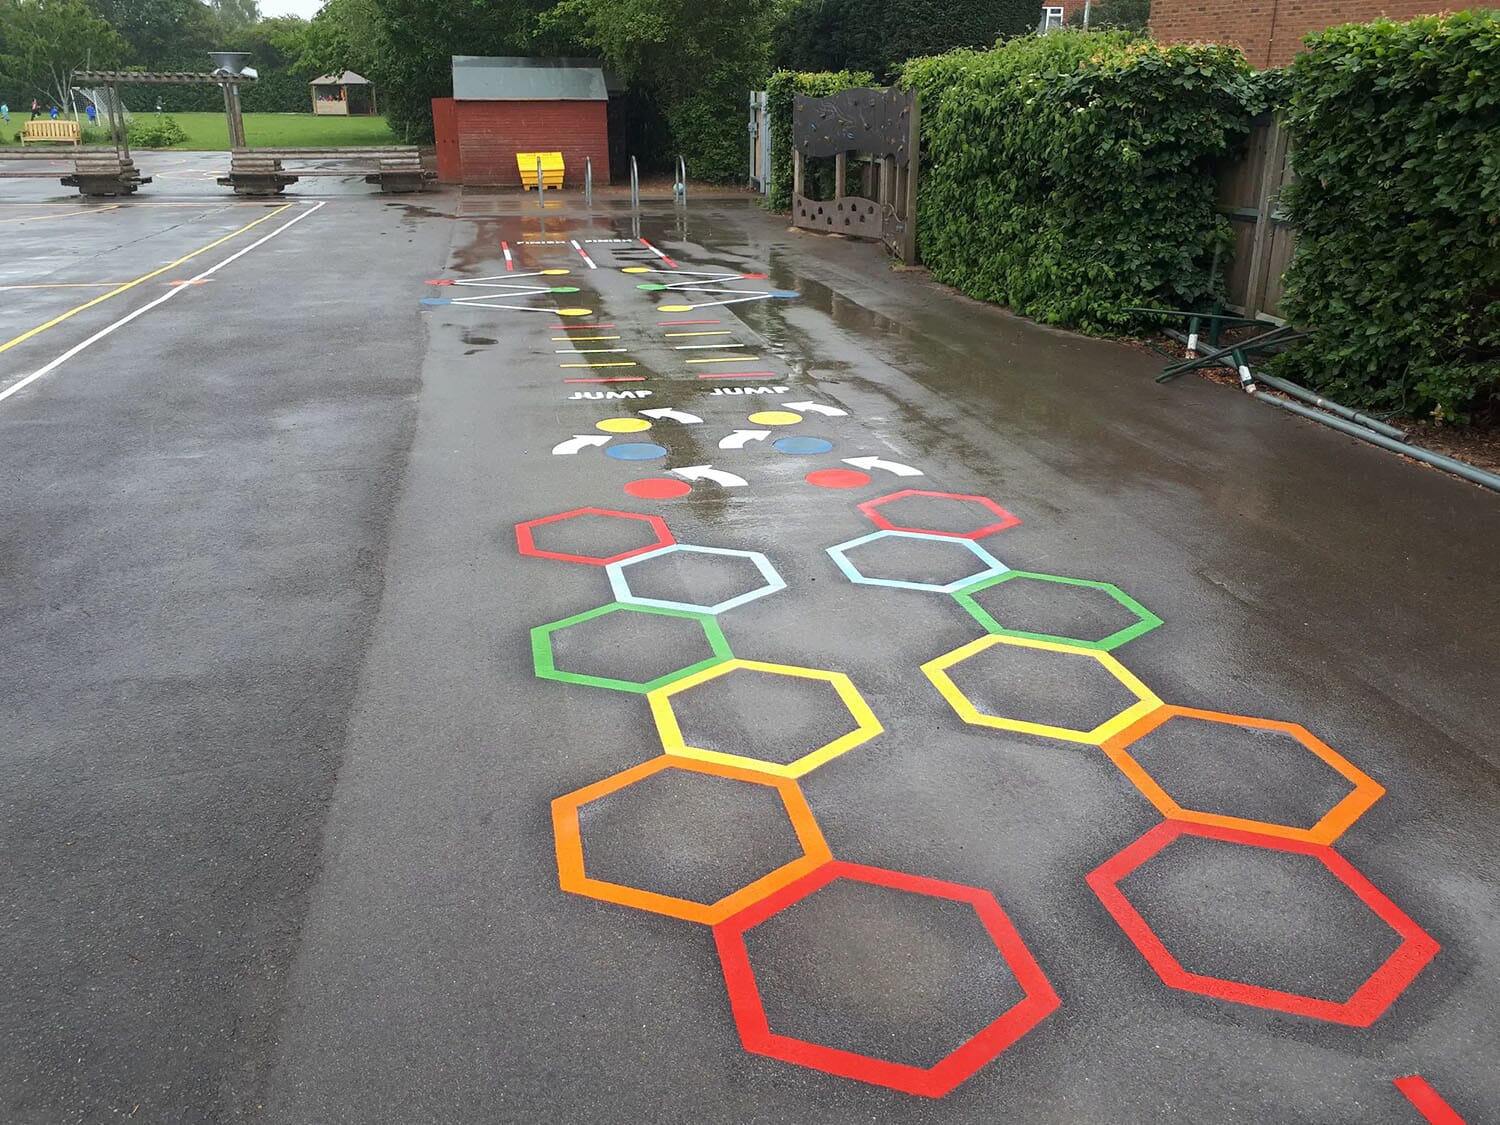 School Playground Markings Add Color and Fun to Schoolyard